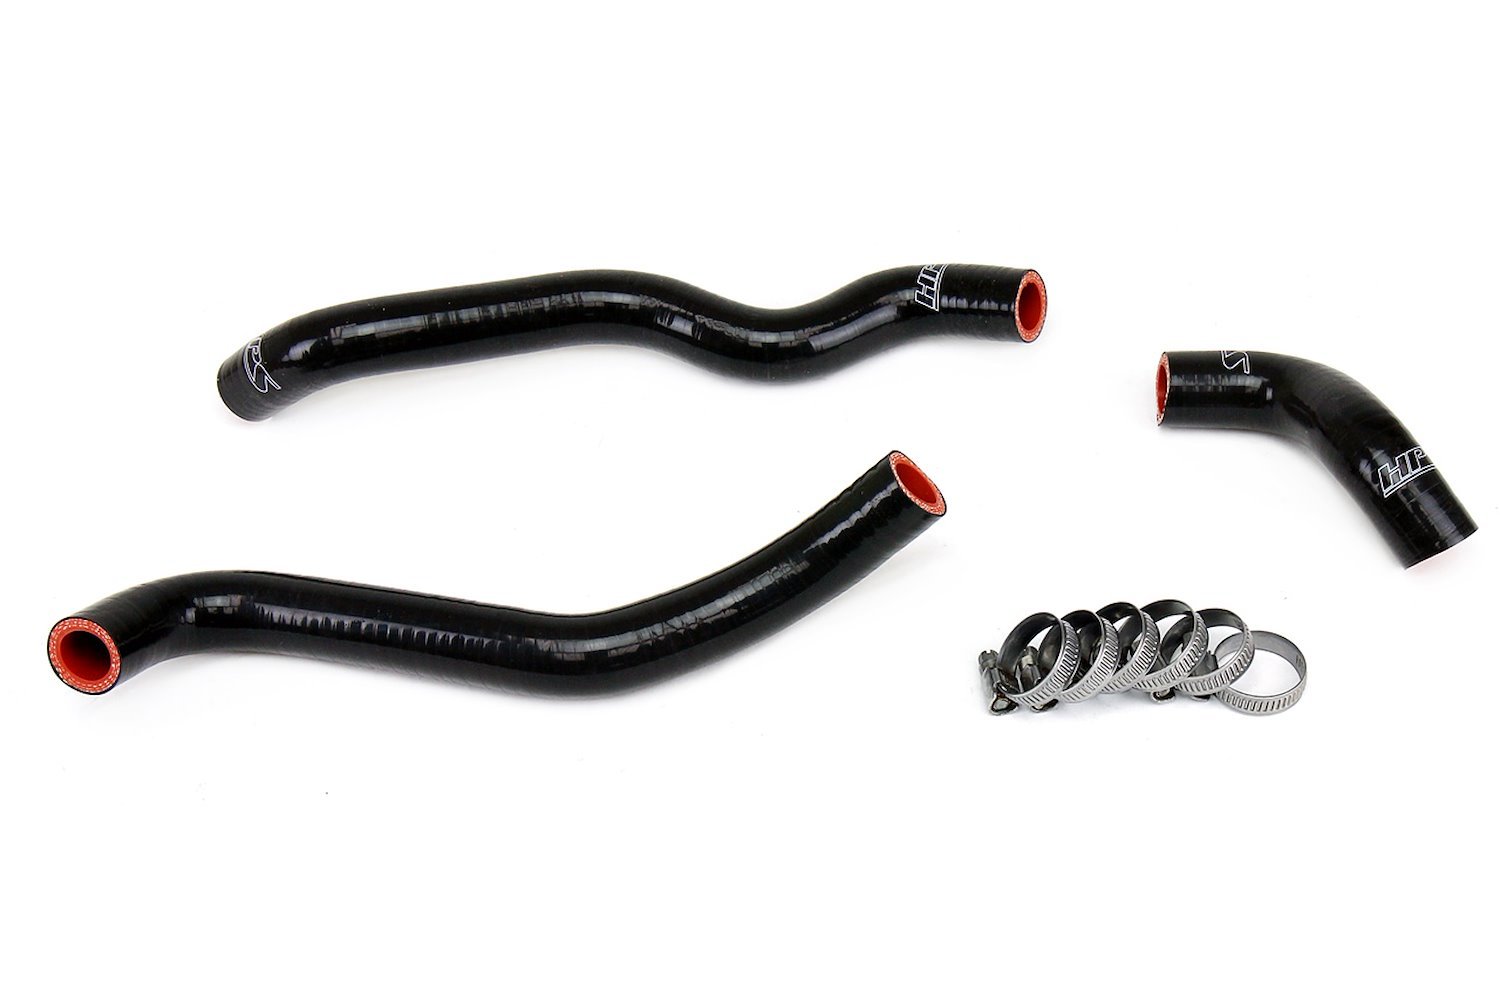 57-1435-BLK Heater Hose Kit, High-Temp 3-Ply Reinforced Silicone, Replace OEM Rubber Heater Coolant Hoses